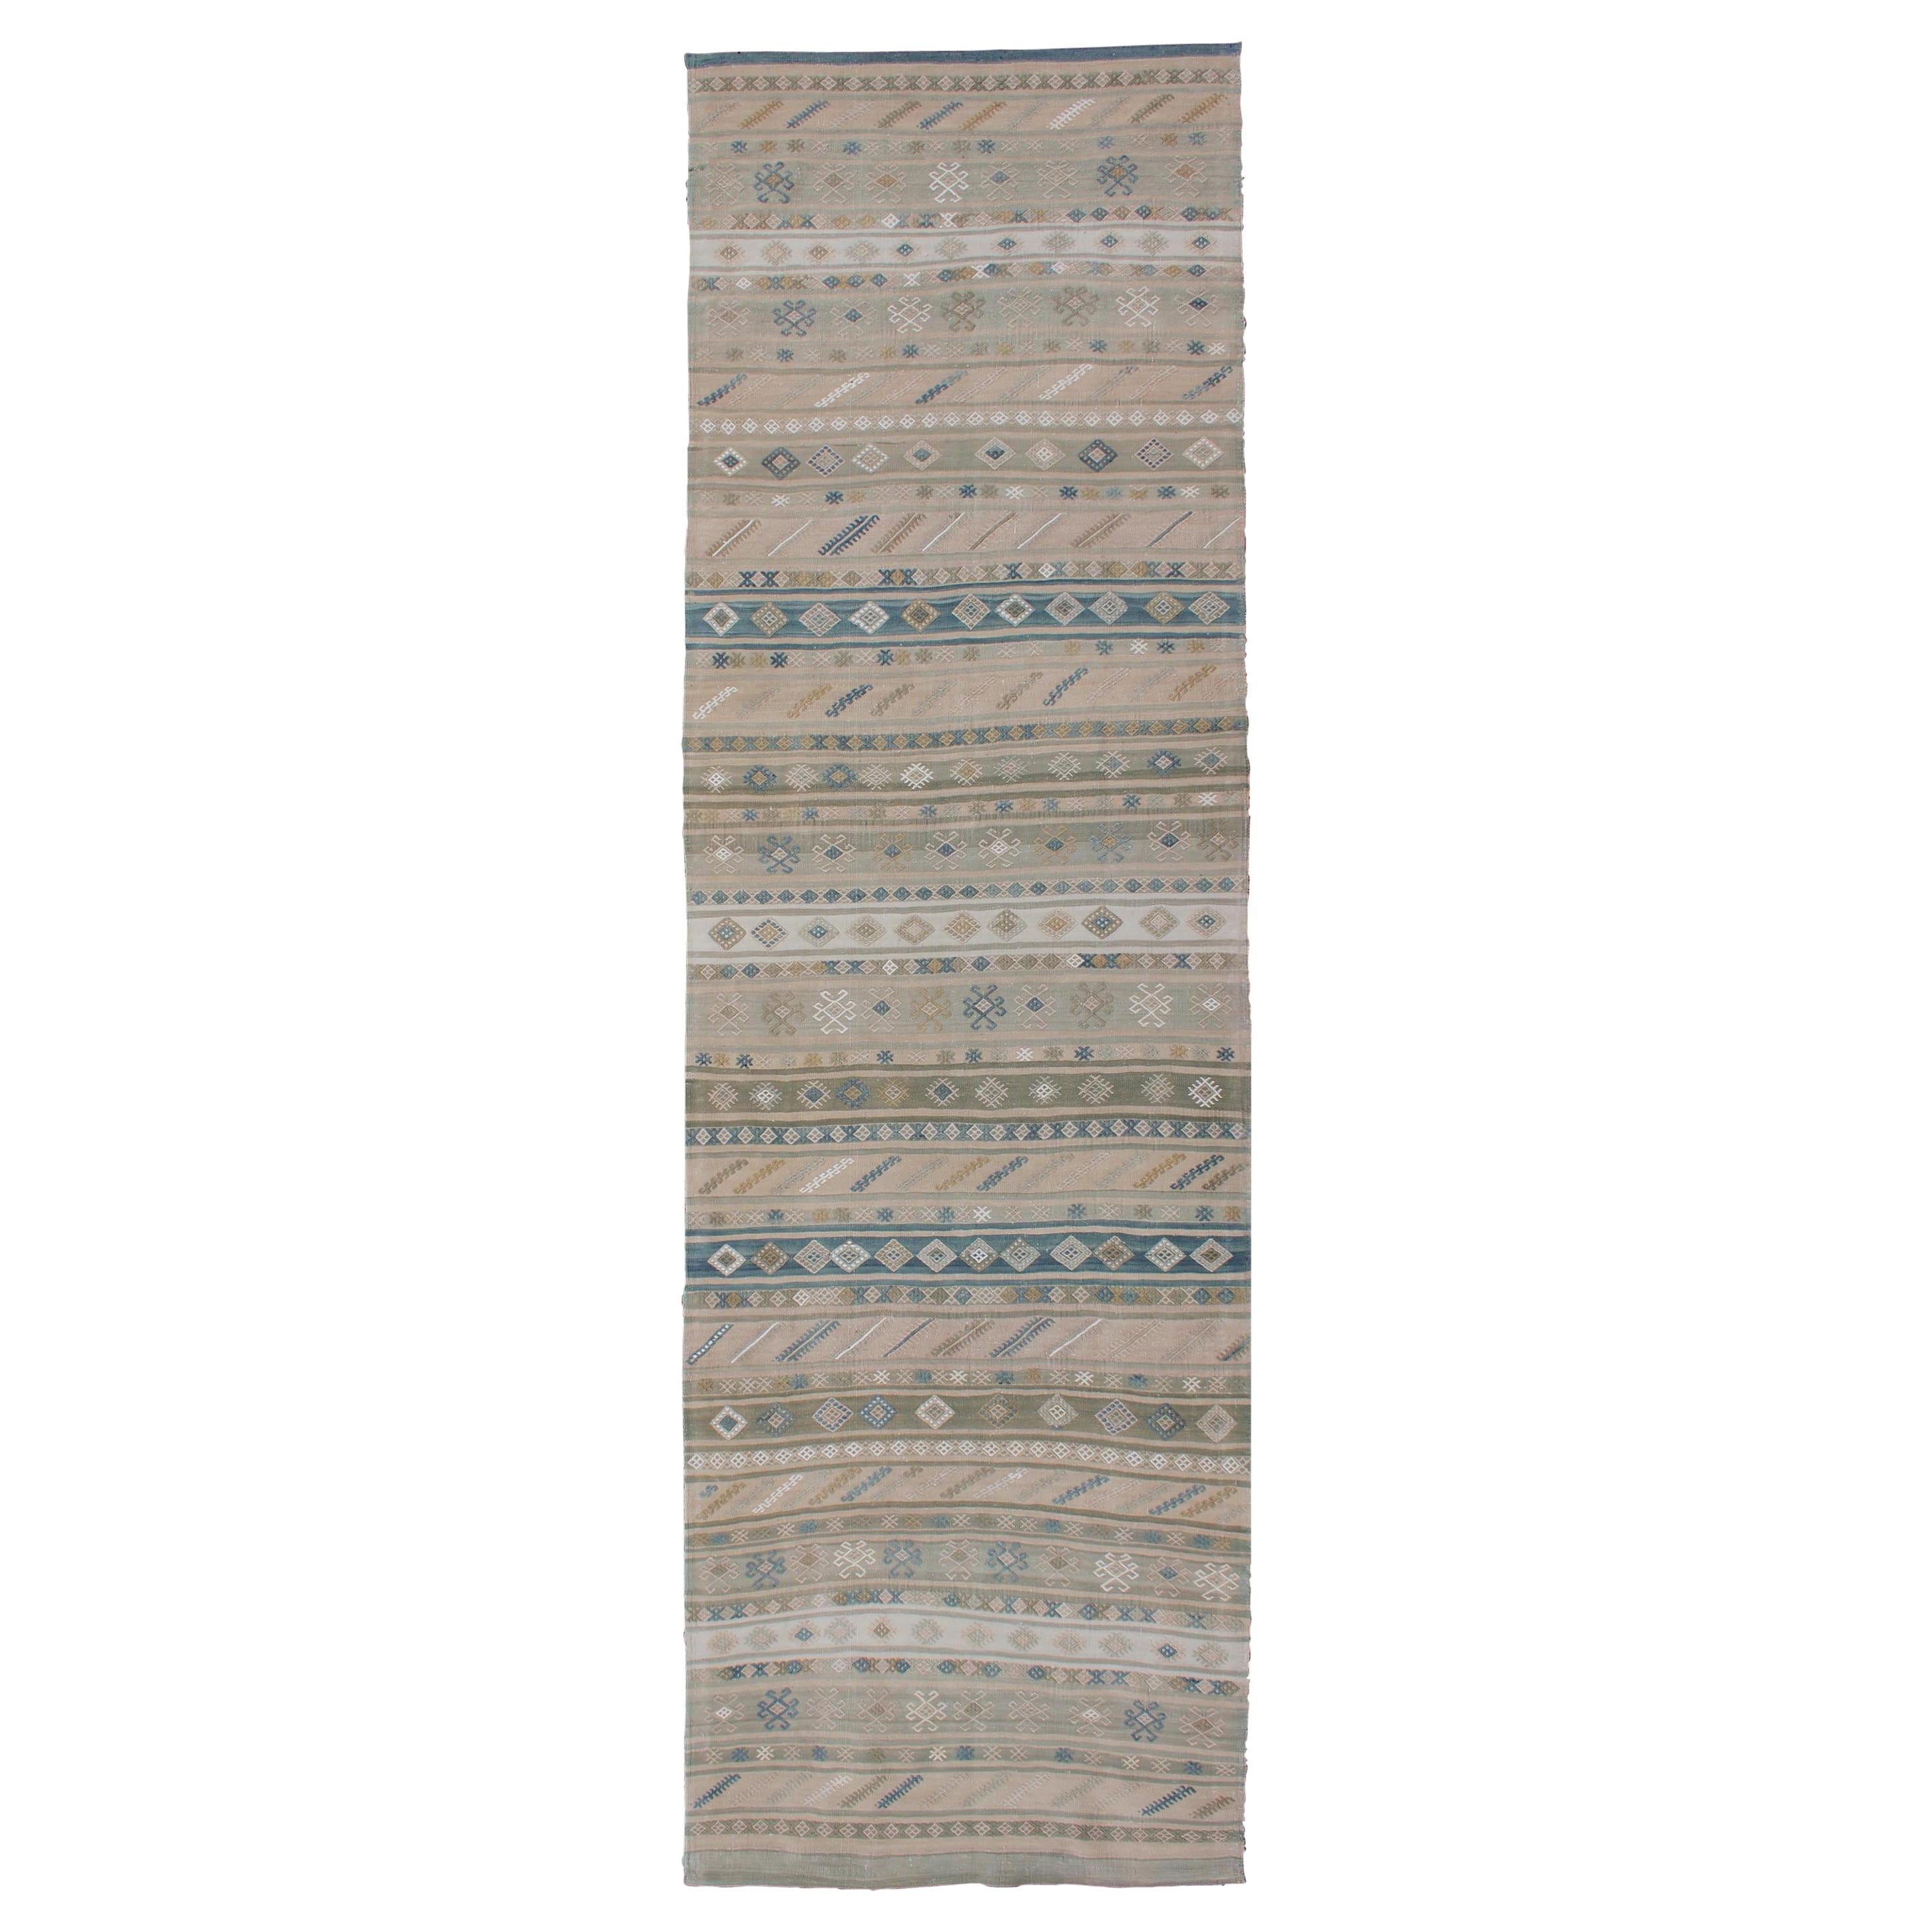 Natural-Toned Turkish Flat-Weave Kilim with Geometric Stripes For Sale